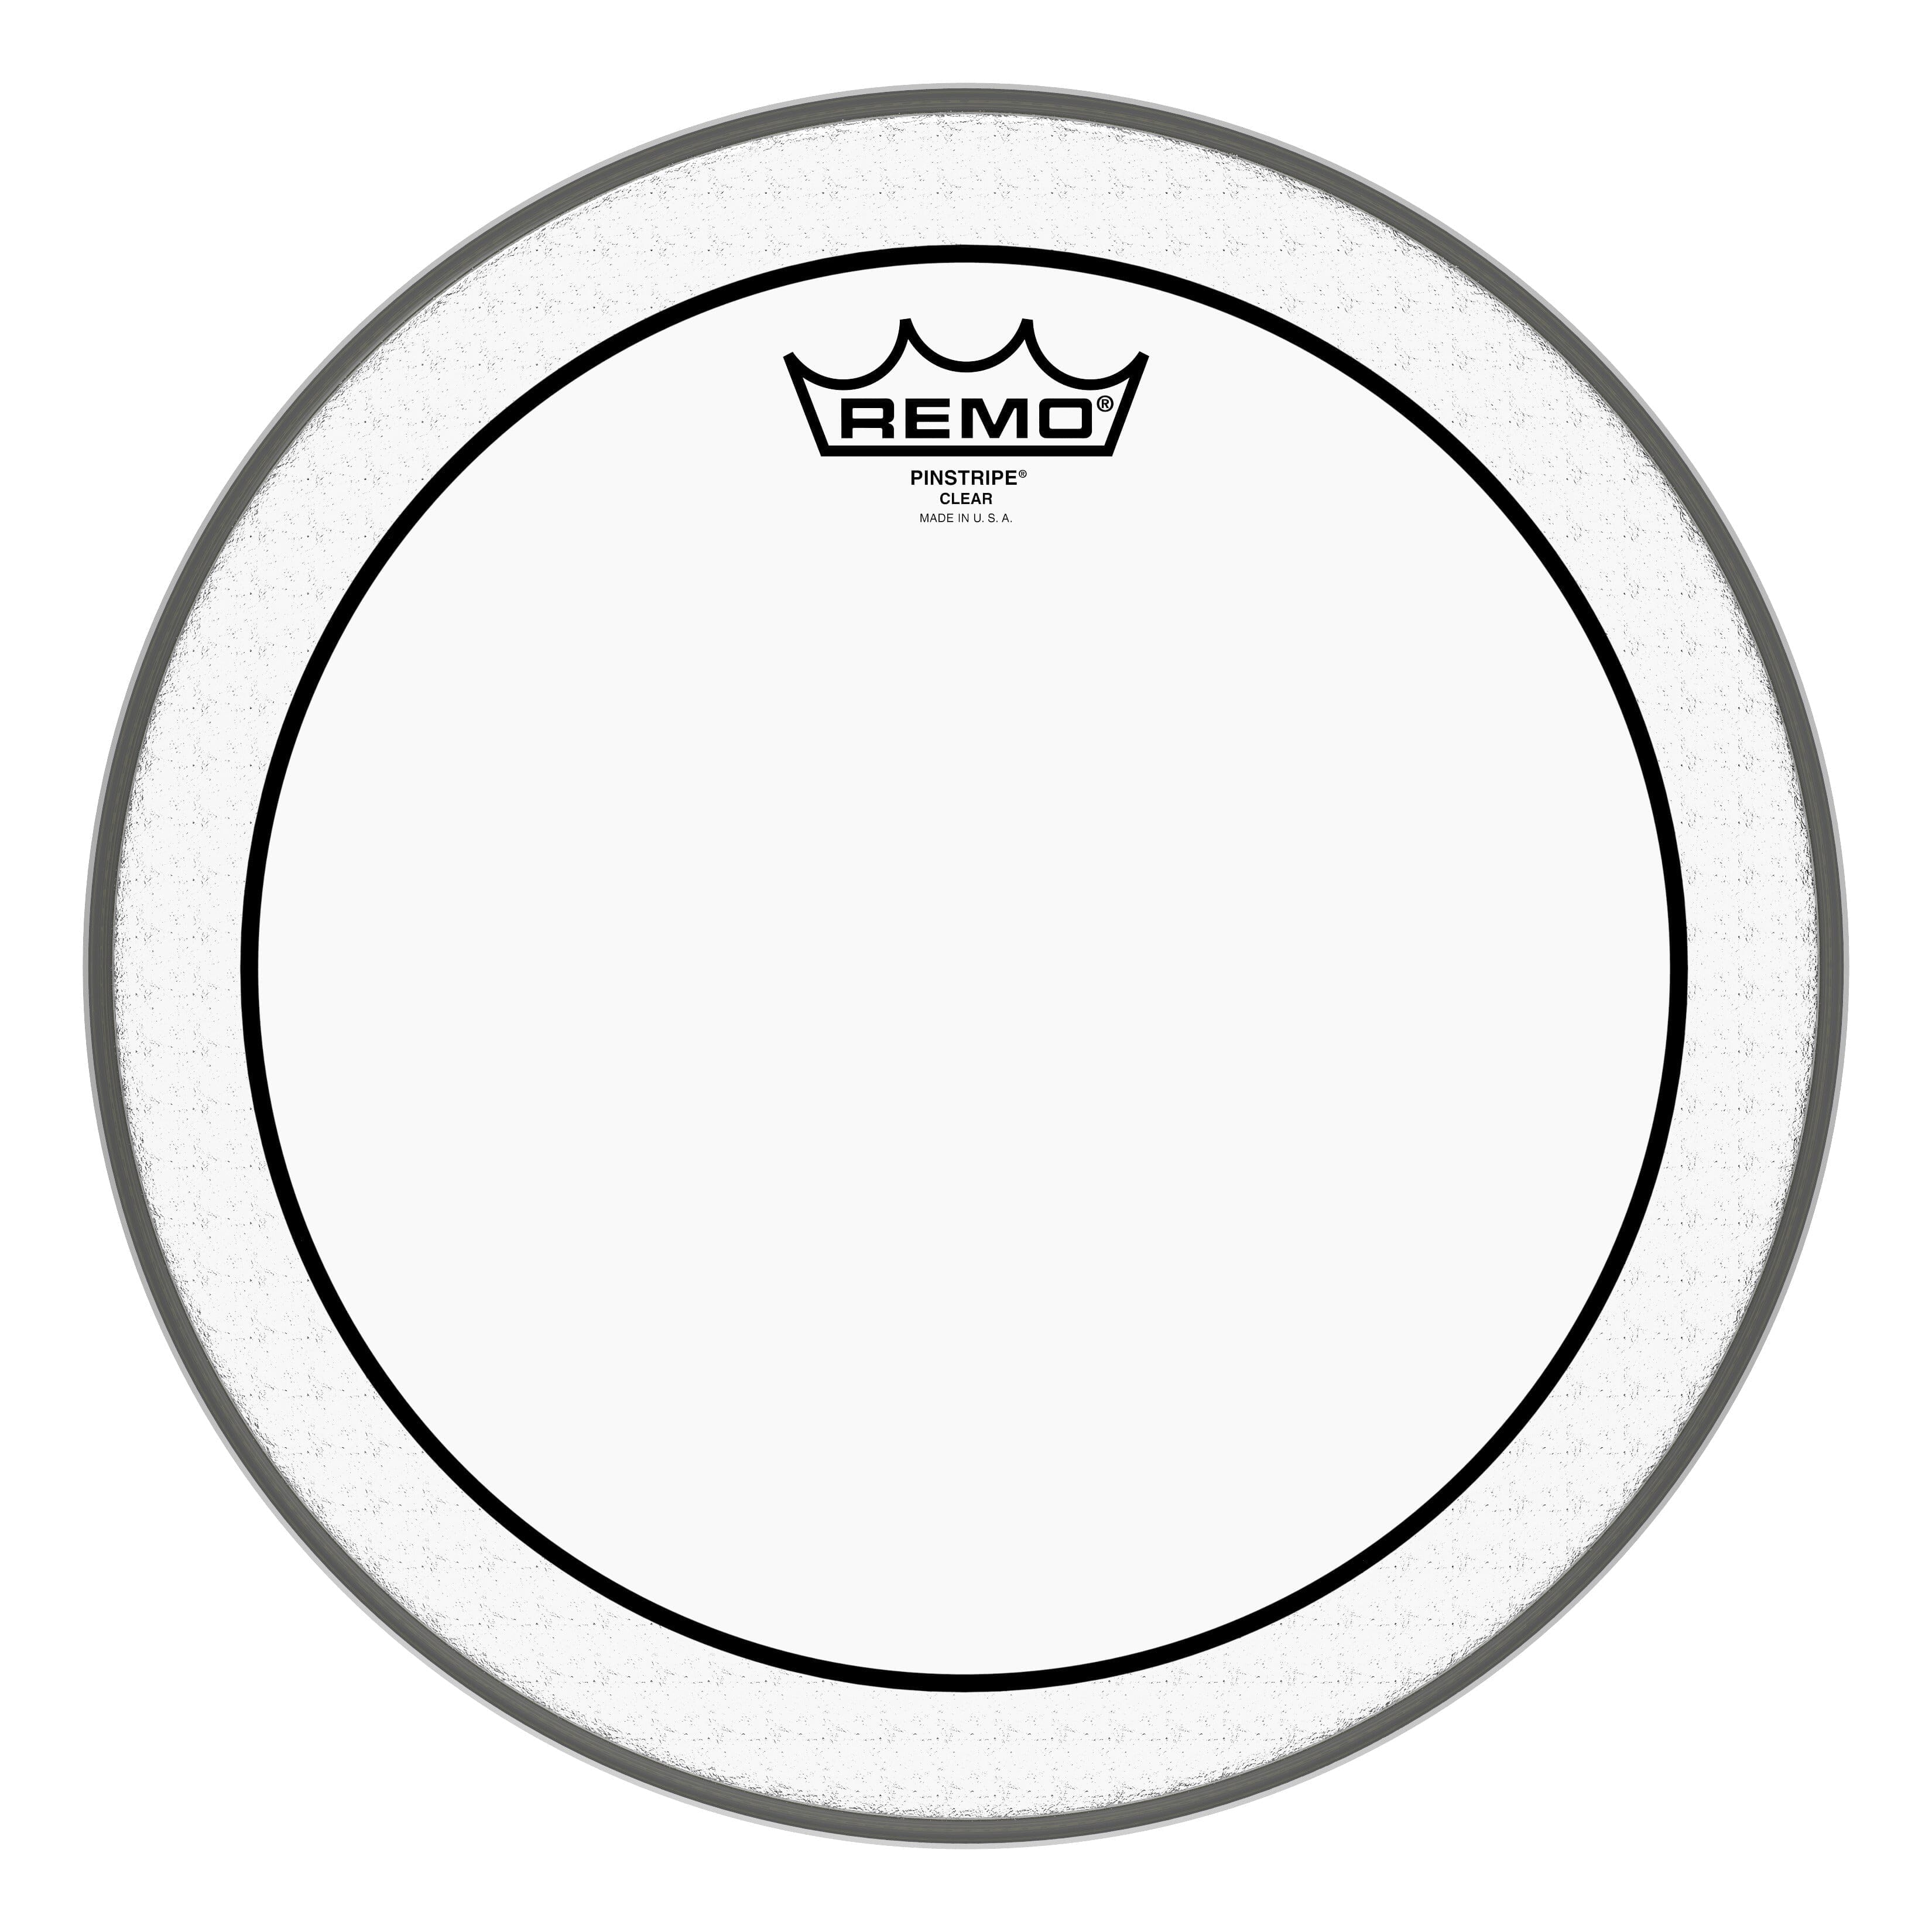 Remo 12" Pinstripe Clear Drum Head (PS-0312-00) DRUM SKINS Remo 